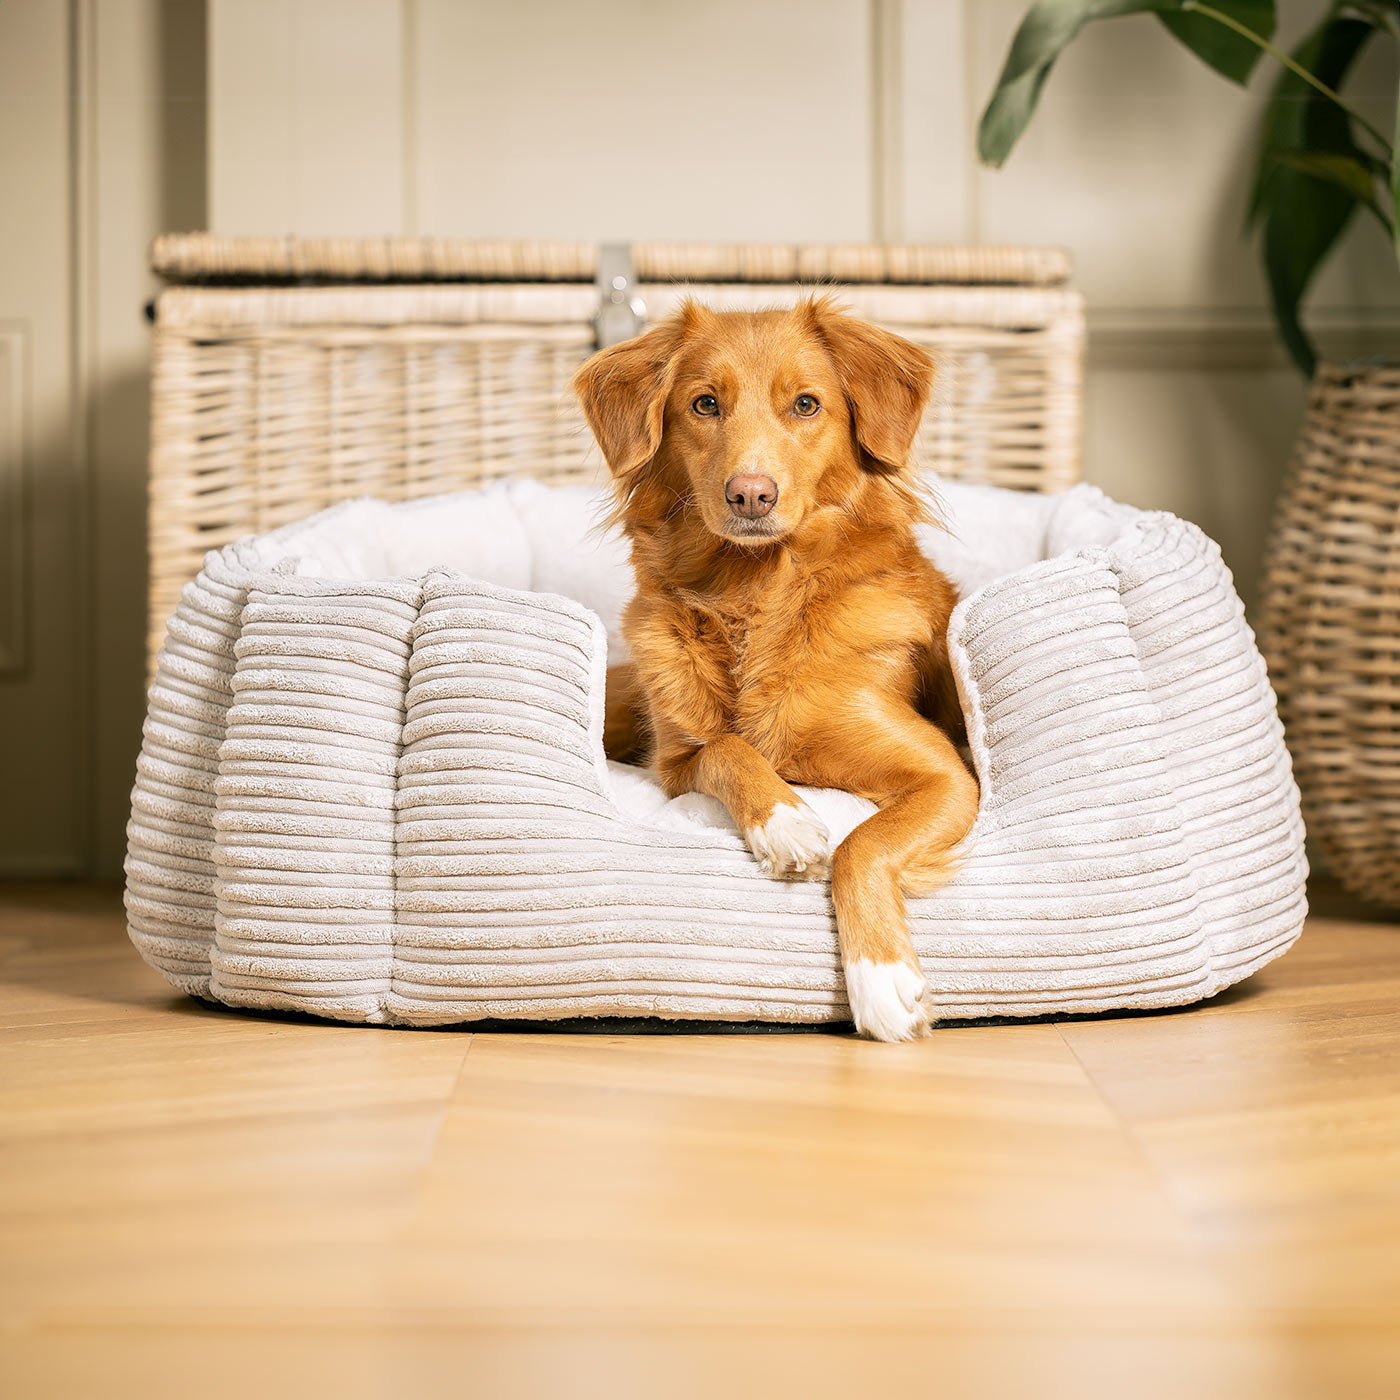 Discover Our Luxurious High Wall Bed For Dogs, Featuring inner pillow with plush teddy fleece on one side To Craft The Perfect Dog Bed In Stunning Essentials Light Grey Plush! Available To Personalize Now at Lords & Labradors US